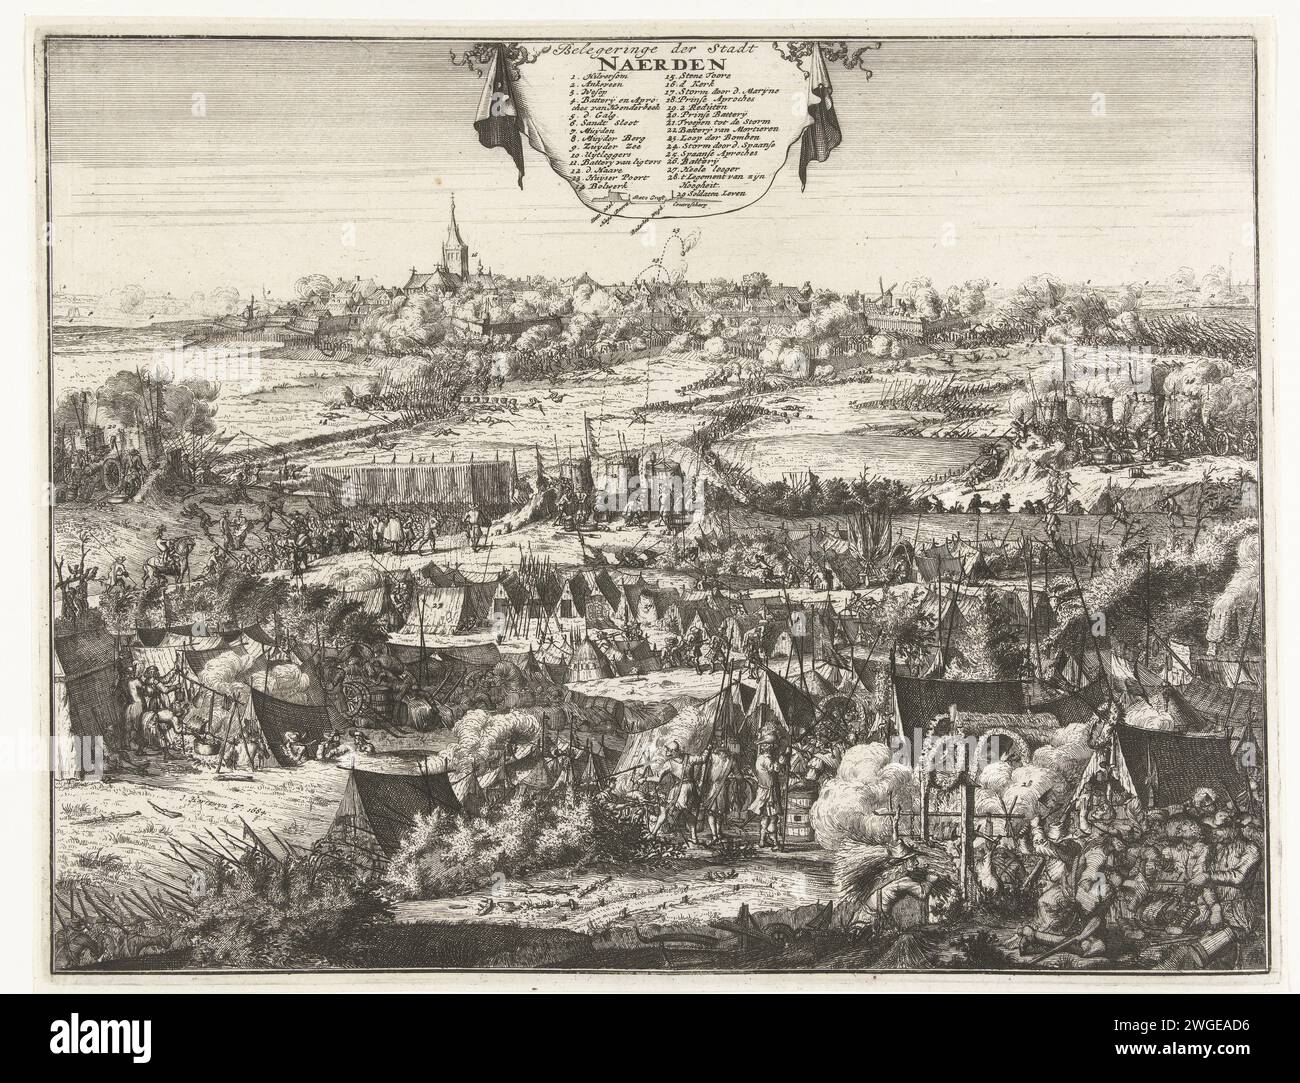 Siege and conquest of Naarden, 1673, 1684 print Siege and conquest of Naarden by the Prince of Orange, 12 September 1673. In the foreground scenes from the soldier life in the army camp. In the distance the siege and the storming of the city. At the top a hanging cloth with title and legend 1-20. Northern Netherlands paper etching / engraving siege, position war. capture of city (after the siege). (military) camp with tents Naarden Stock Photo